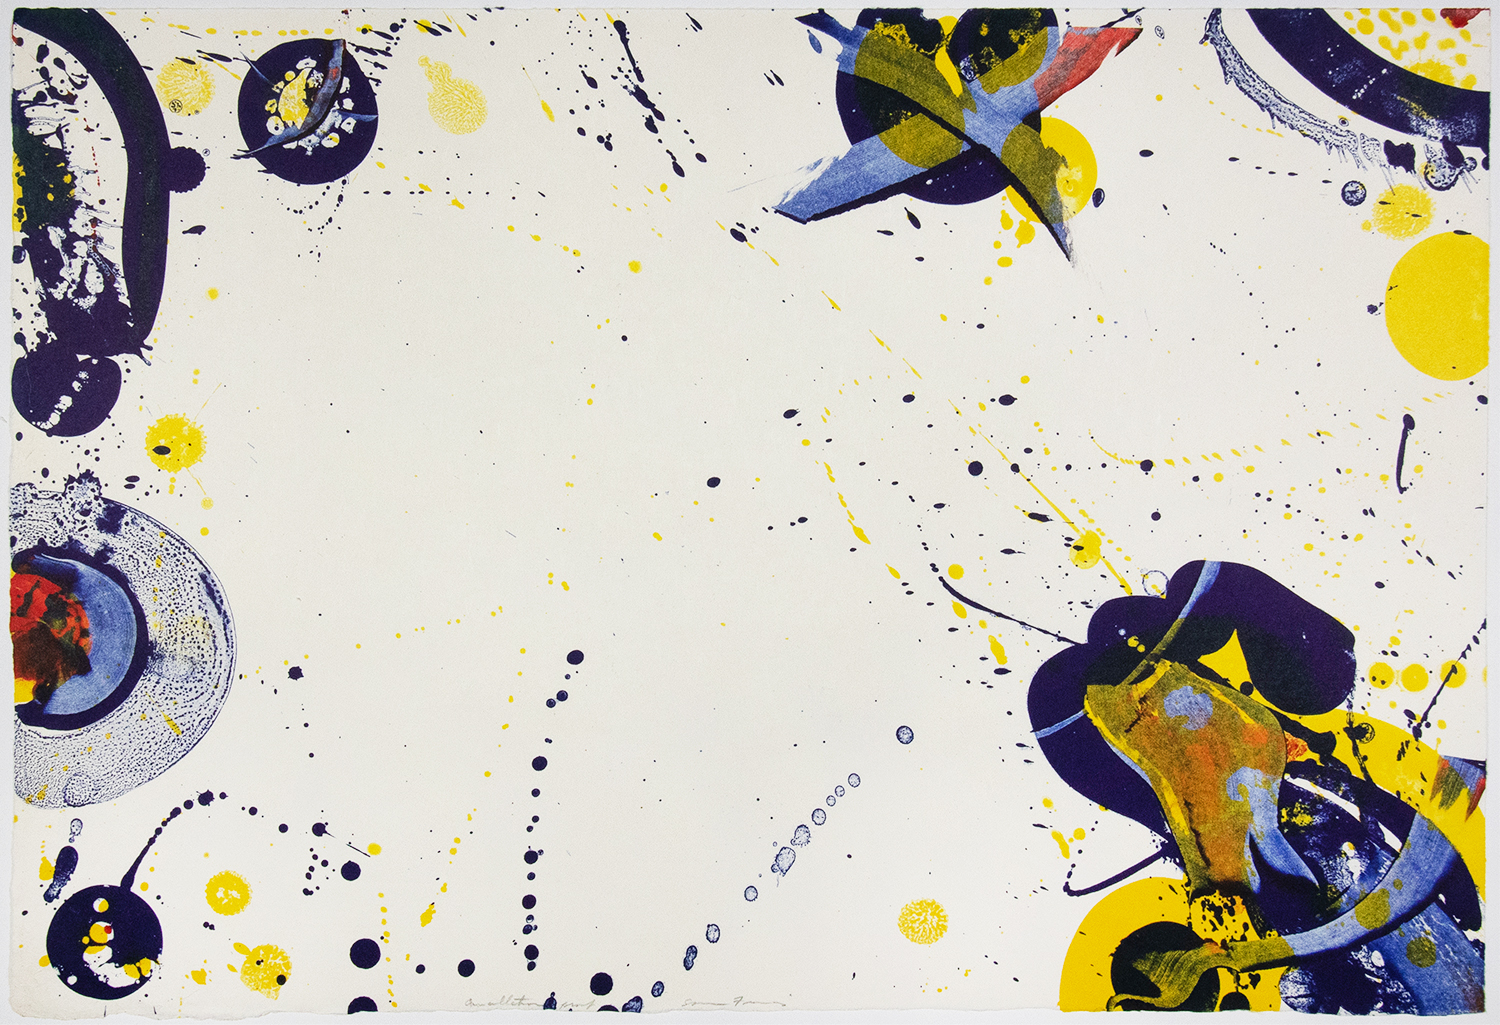 Sam Francis special proof of abstraction in blue and yellow ink